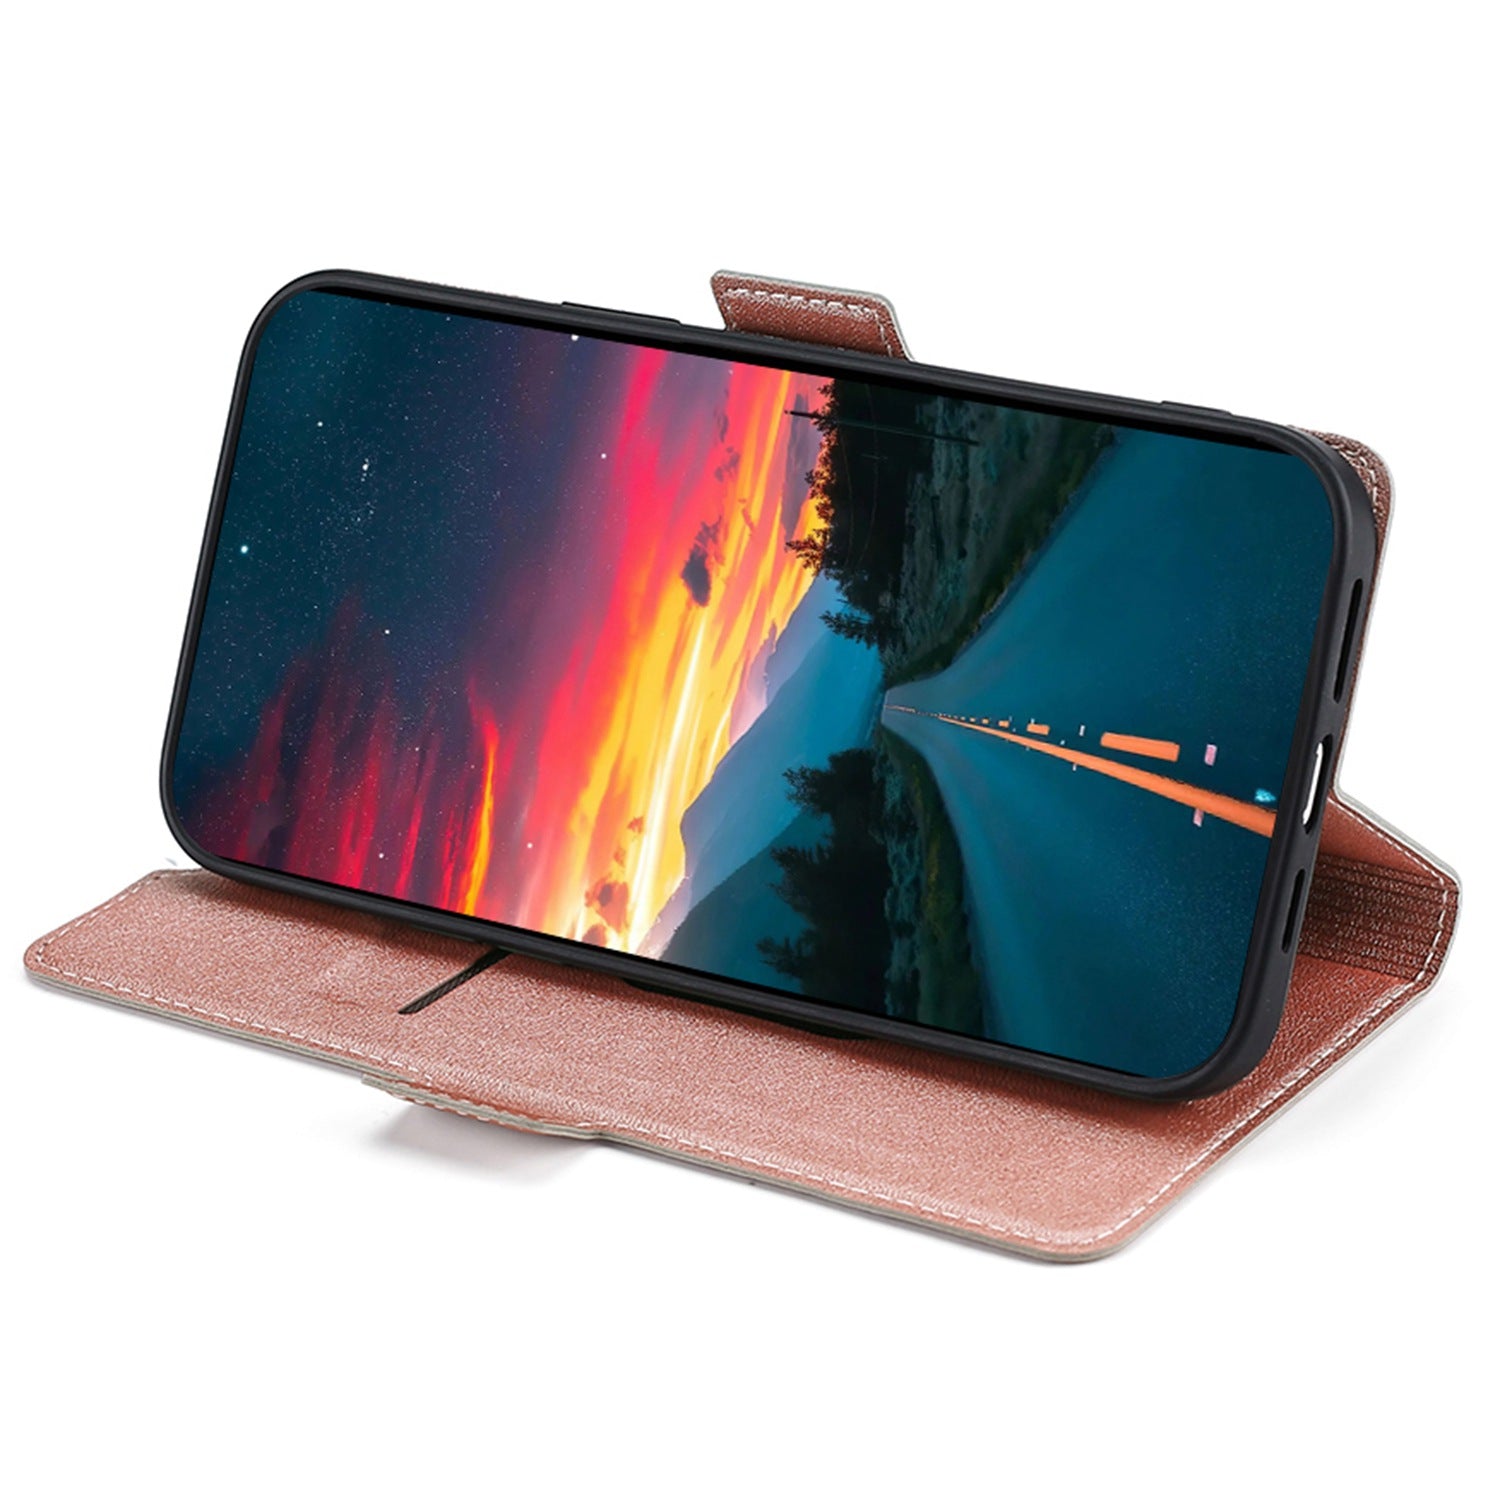 Uniqkart for Sharp Aquos R8 Pro SH-51D PU Leather Stand Phone Cover Card Holder Anti-drop Case - Rose Gold